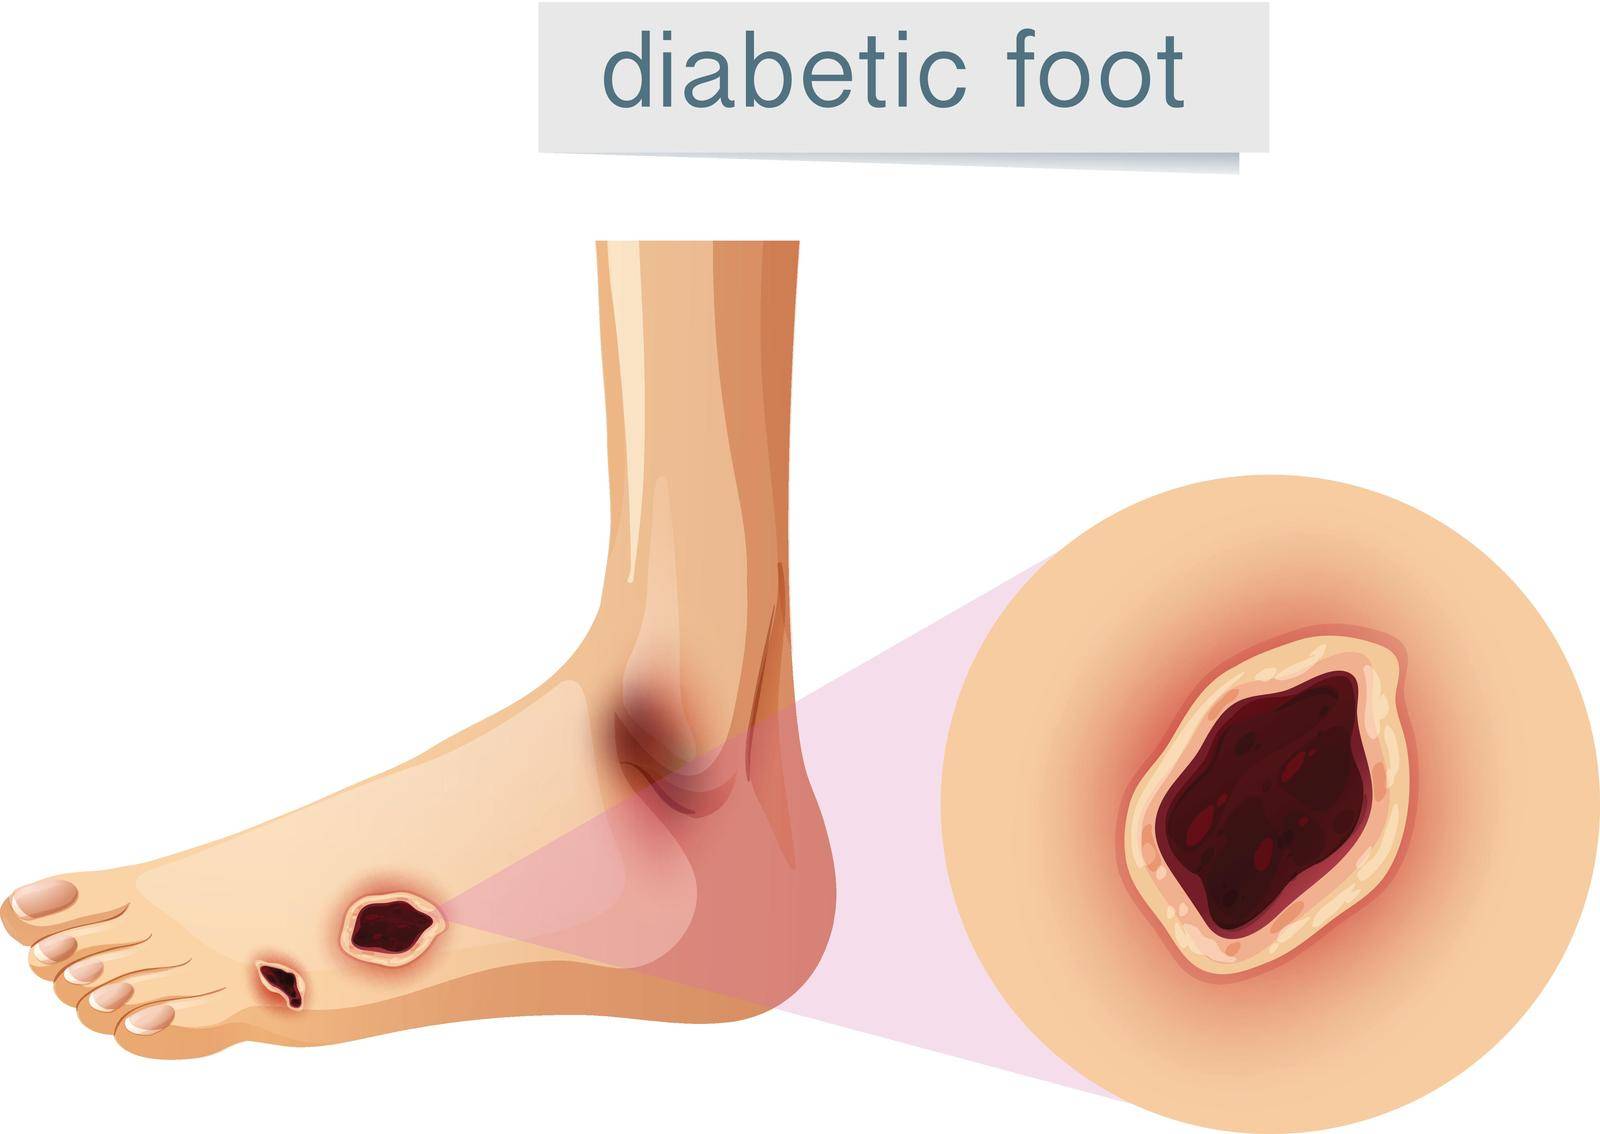 Diabetic foot magnifed on foot illustration